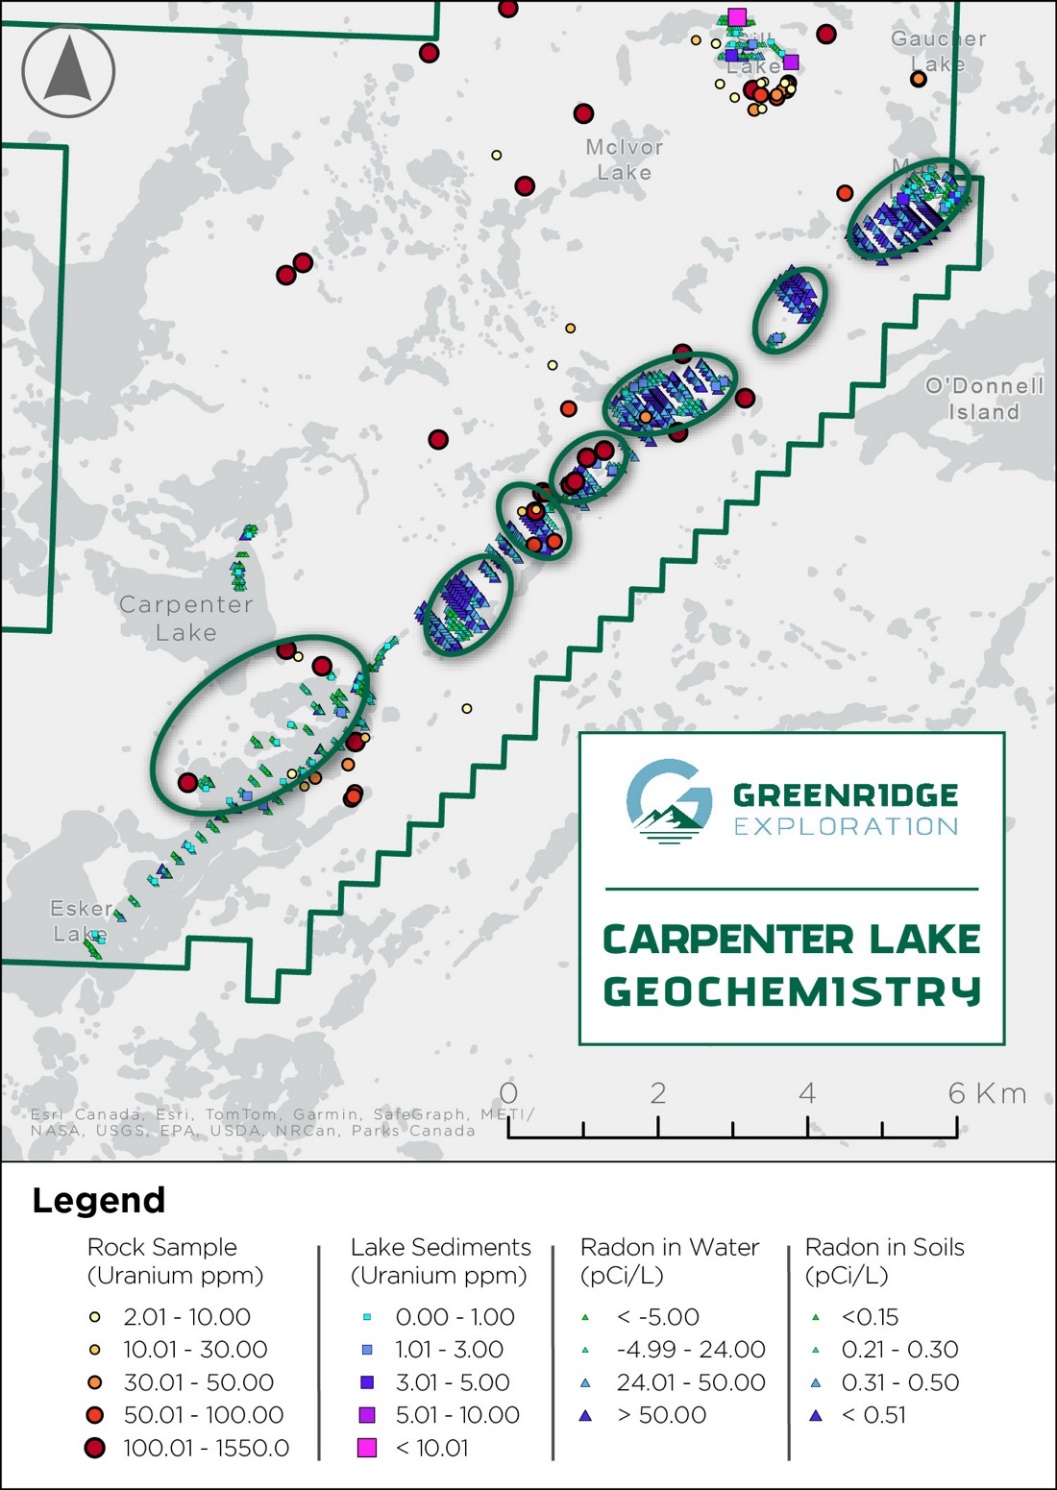 Figure 3: Carpenter Lake Property Geochemistry (Rock samples are primarily sourced from boulders)